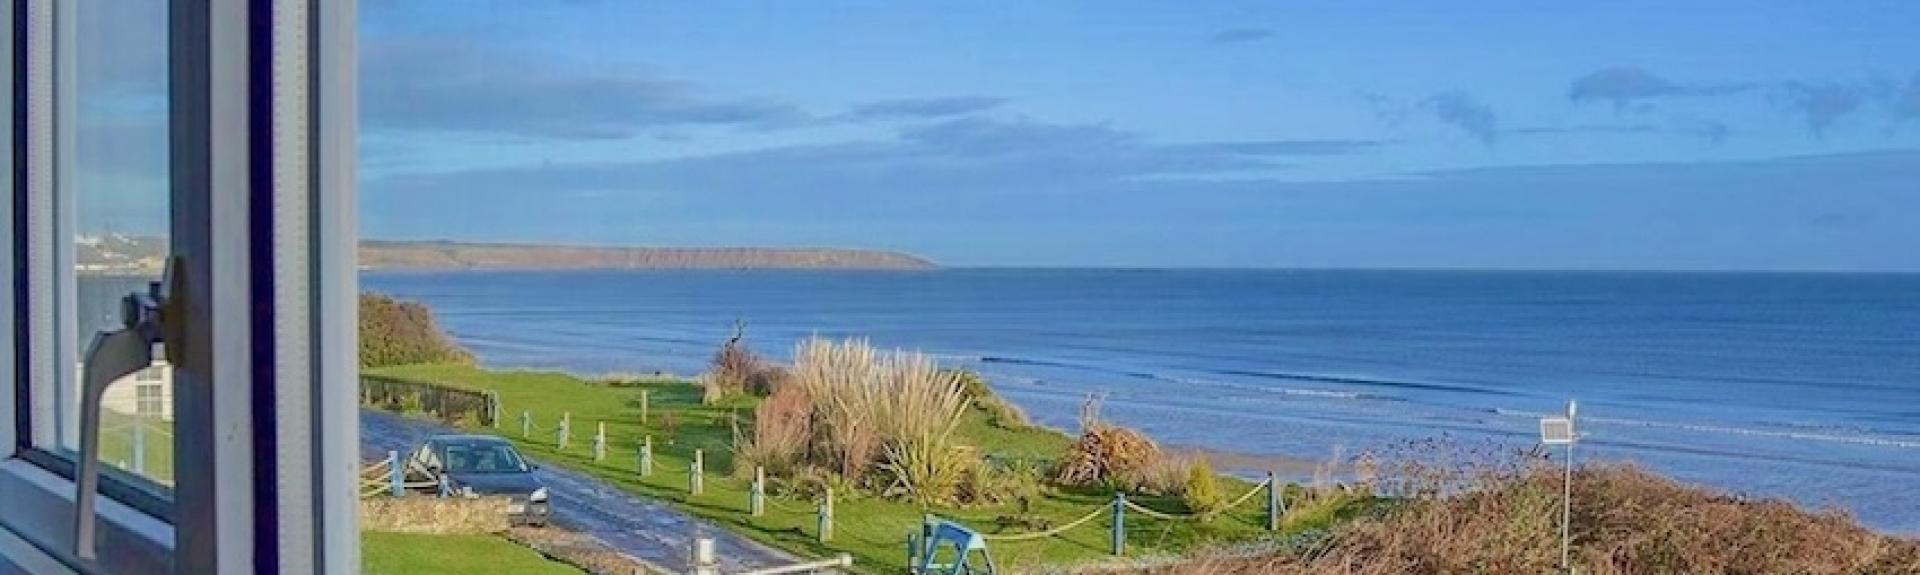 Sea views from a beach-front villa window in Filey